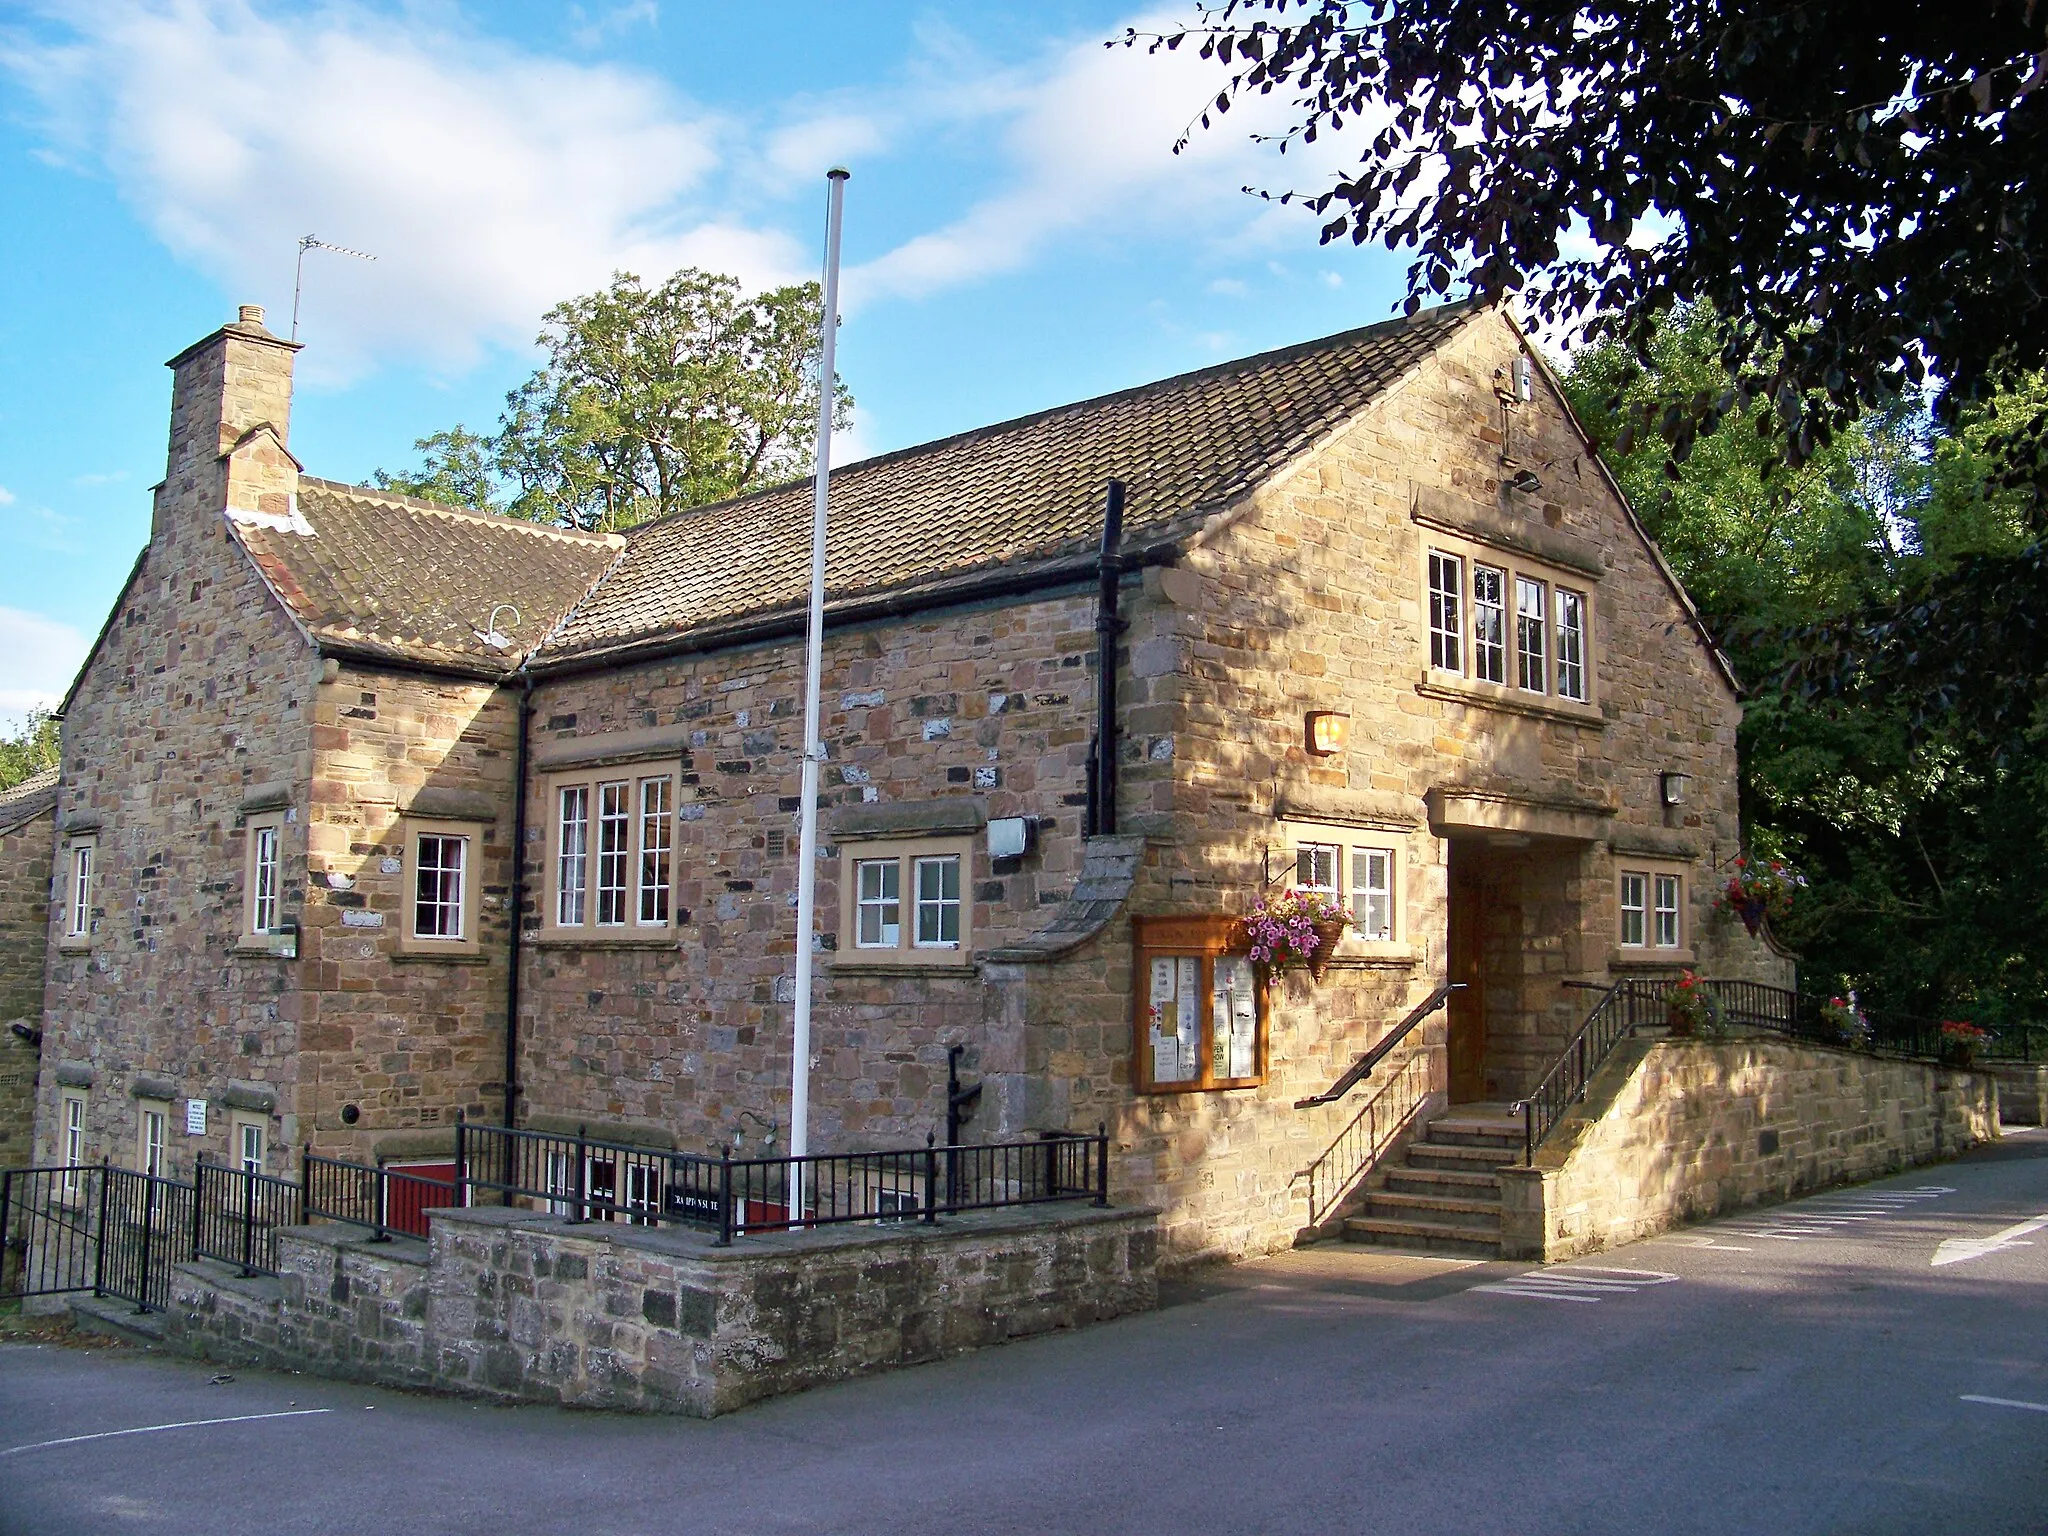 Photo showing: Linton village hall, Linton, Leeds, West Yorkshire, UK.  Taken on the evening of Monday 3rd August 2009.